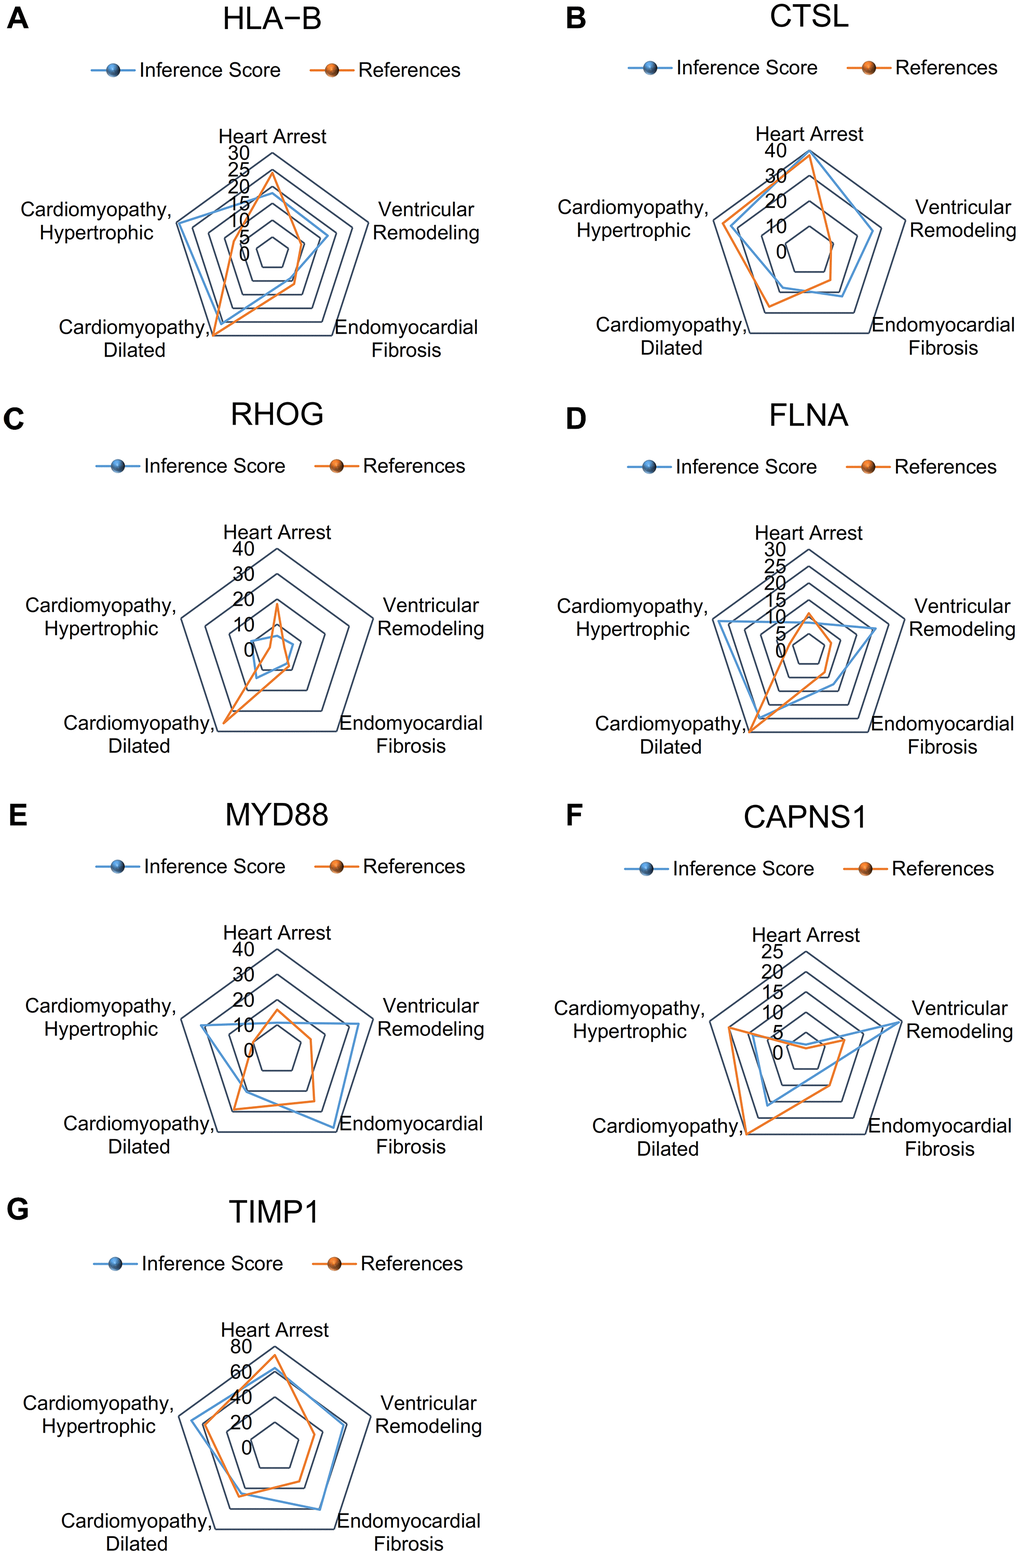 Relationship to ventricular remodeling related to significant hub genes, based on the CTD. (A) HLA-B, (B) CTSL, (C) RHOG, (D) FLNA, (E) MYD88, (F) CAPNS1, and (G) TIMP1.